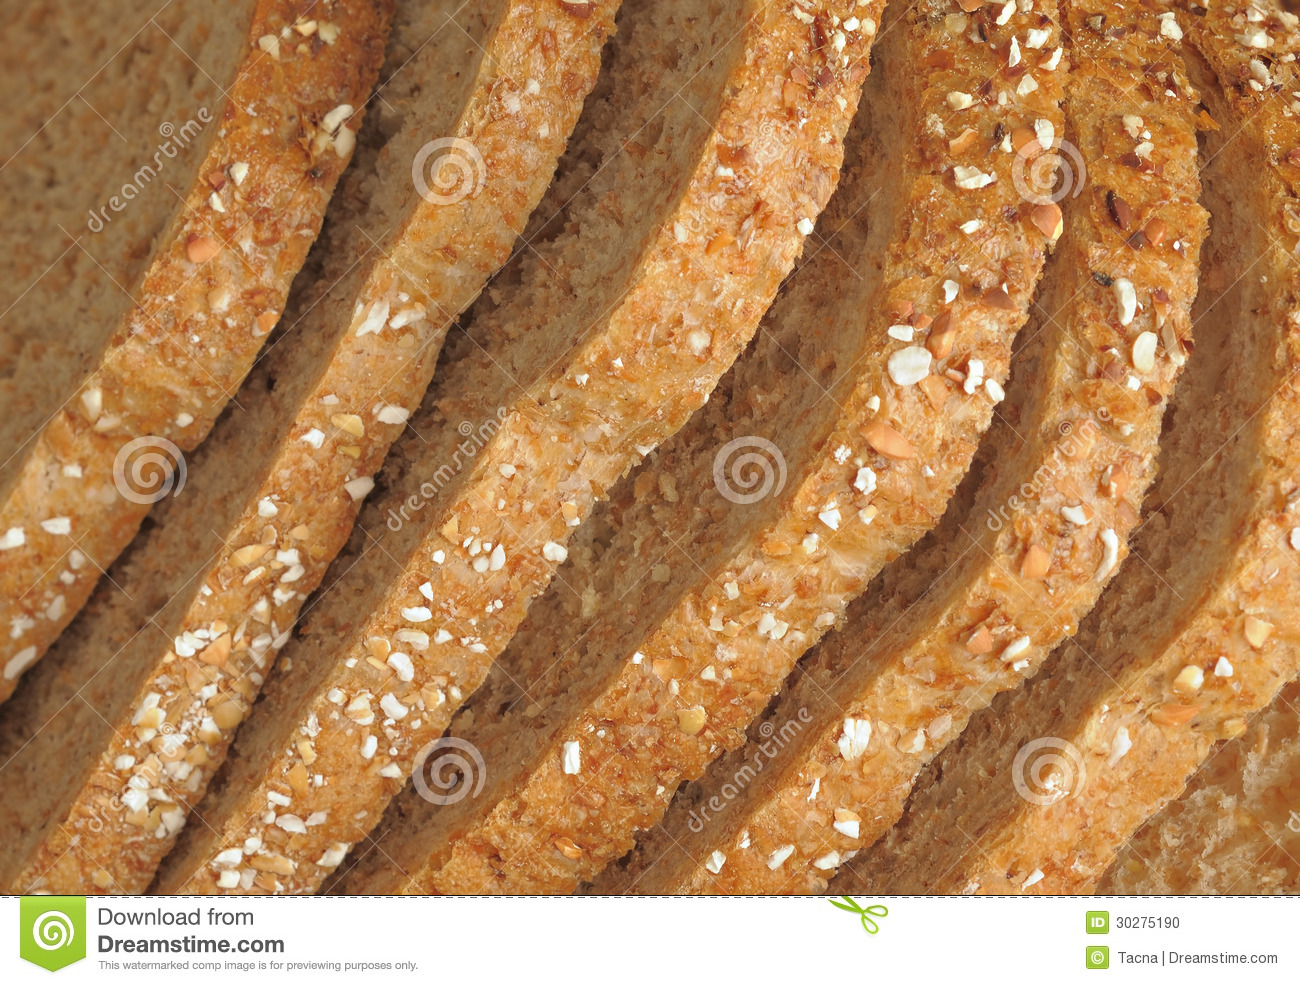 Slices Of Fresh Black Whole Grain Bread With Visible White Seeds